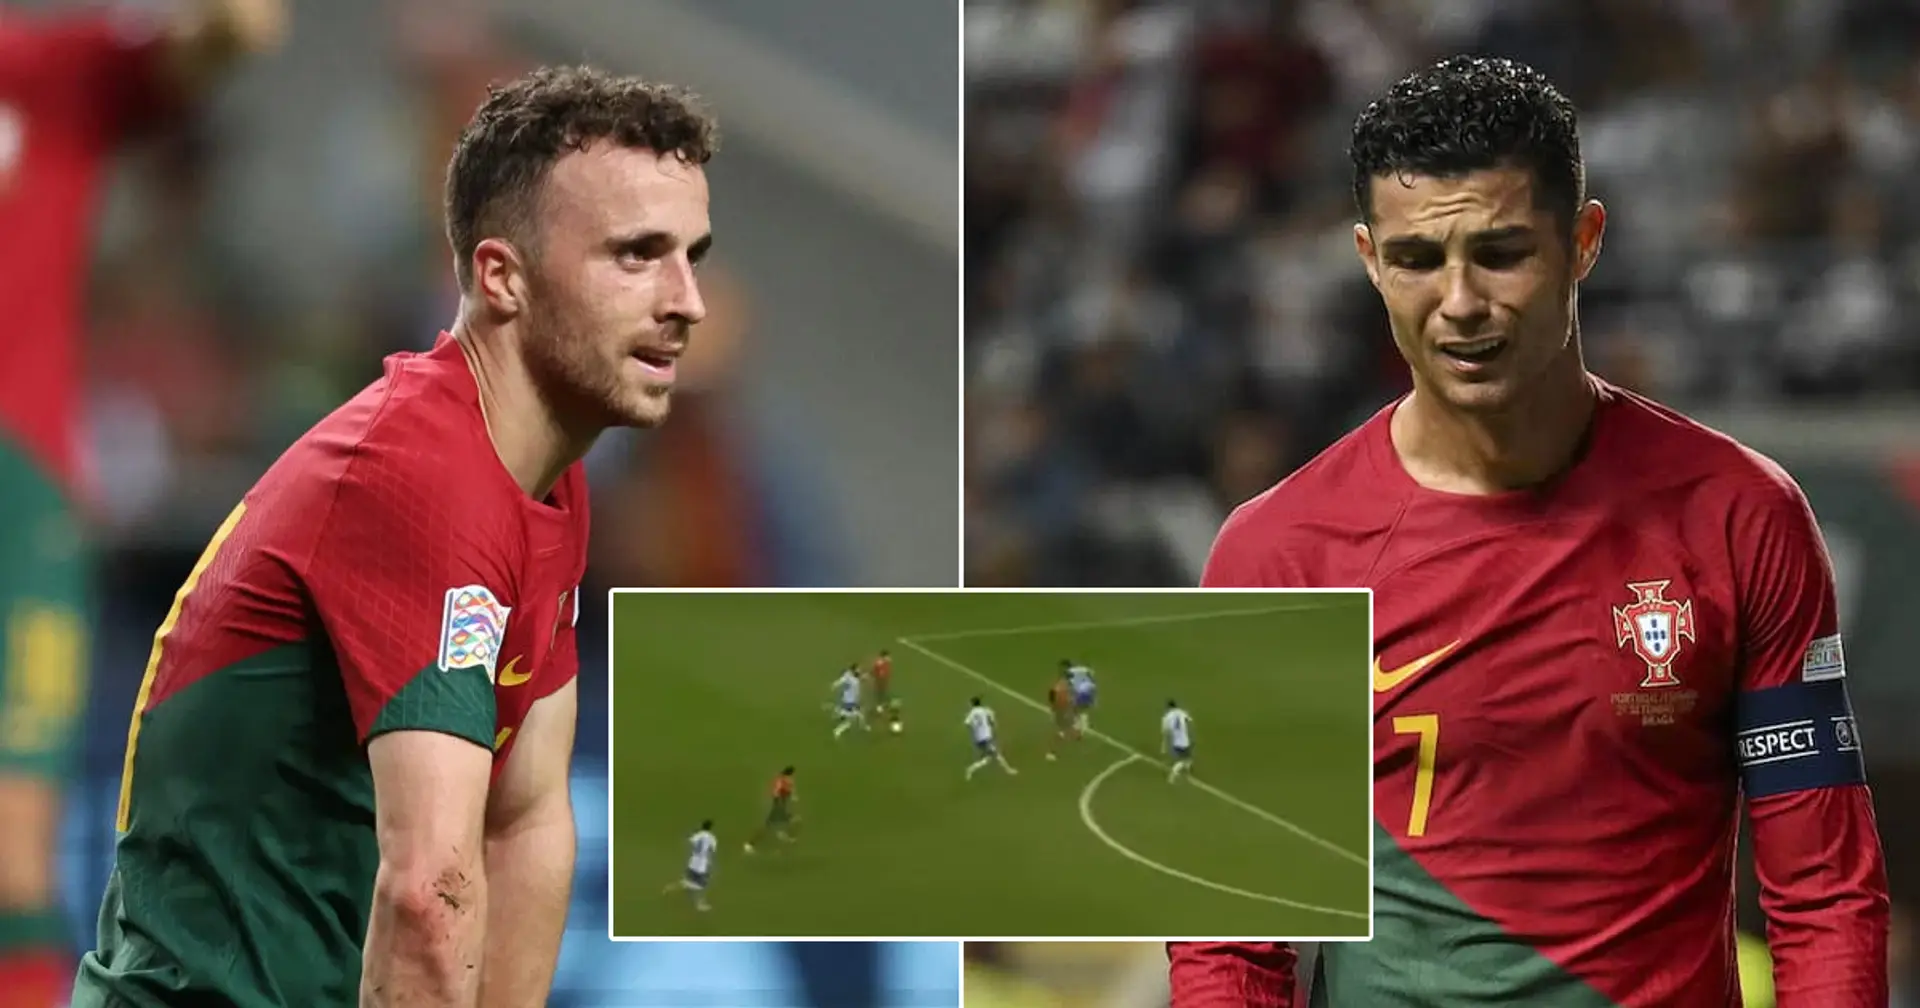 Diogo Jota creates golden chance for Portugal wasted by Ronaldo - spotted